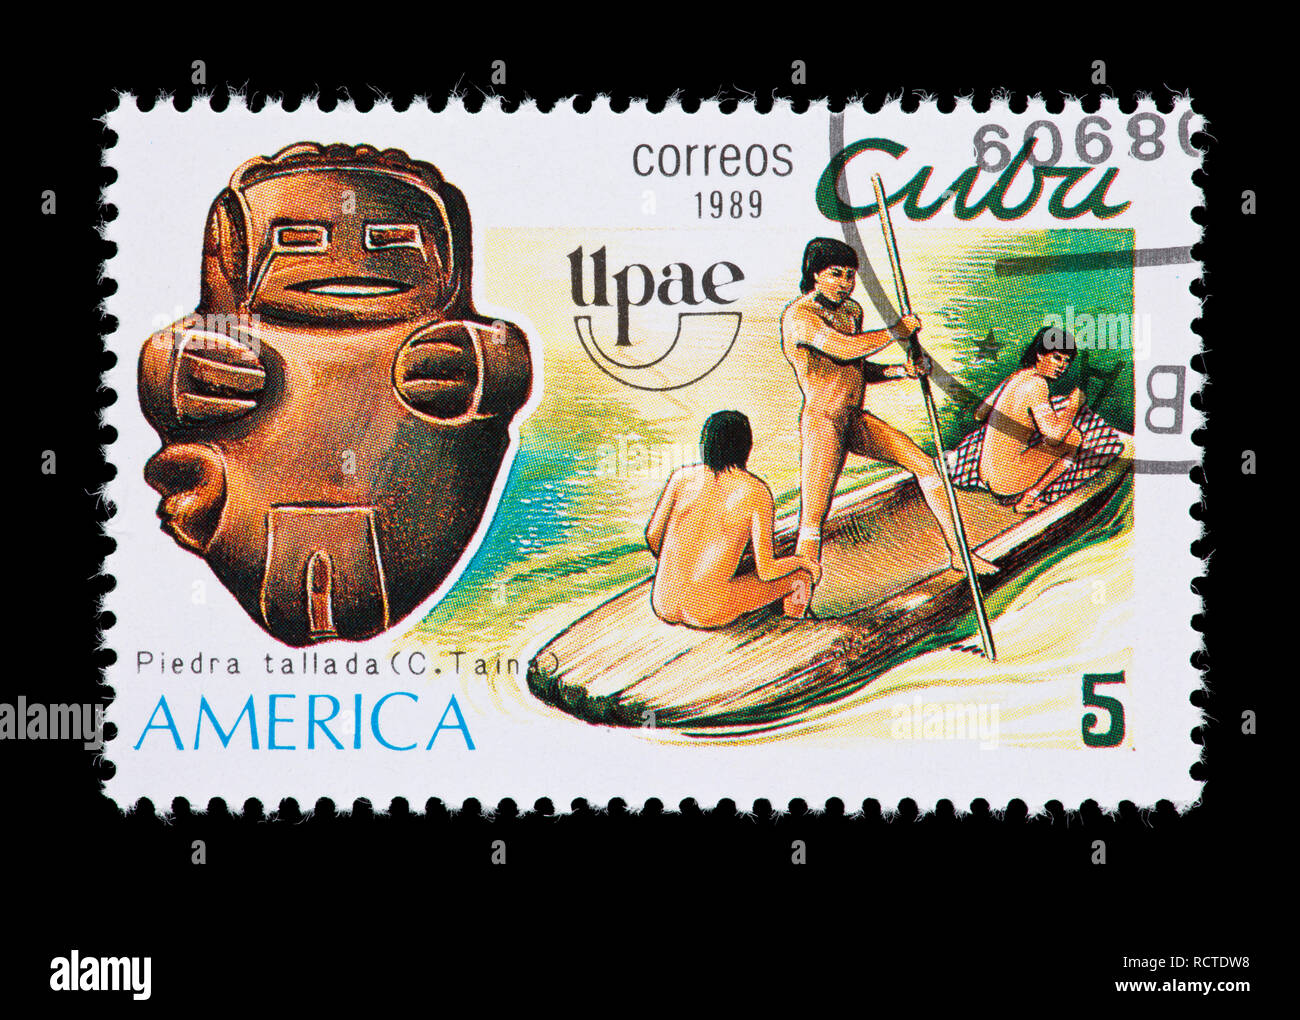 Postage stamp from Cuba depicting a stone carving and Indians on a dugout canoe Stock Photo